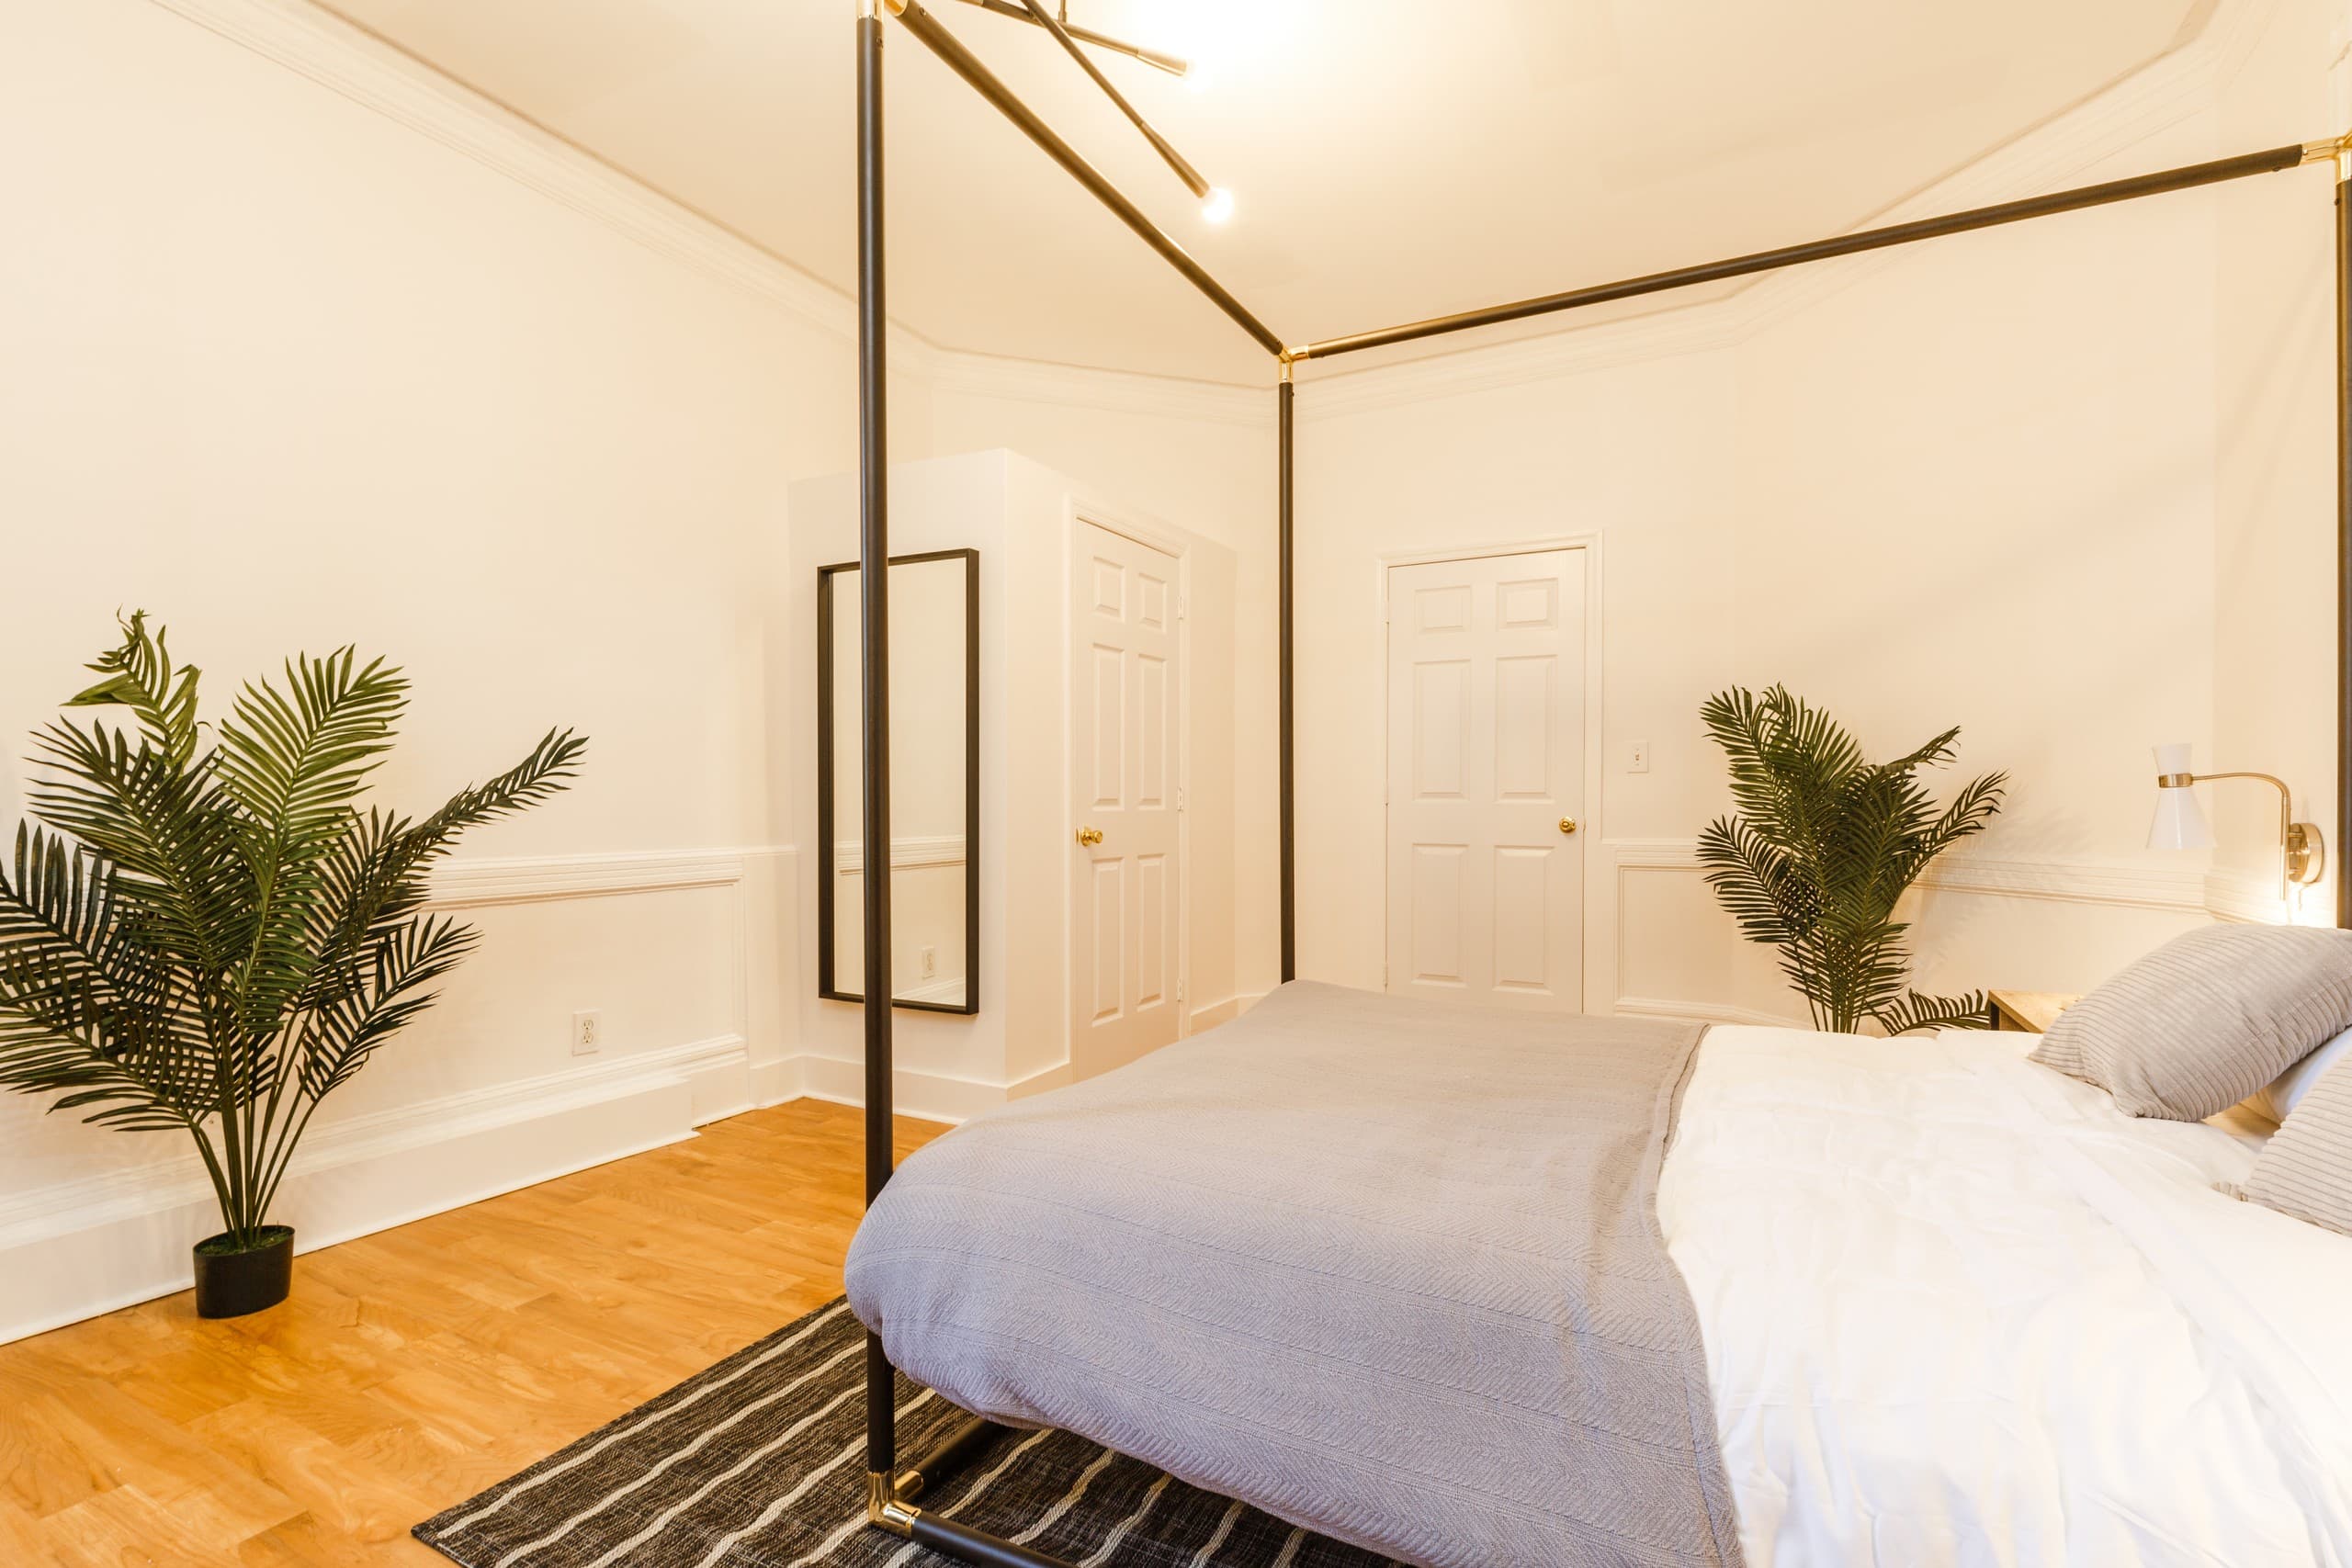 Photo 14 of #298: Queen Bedroom A at June Homes